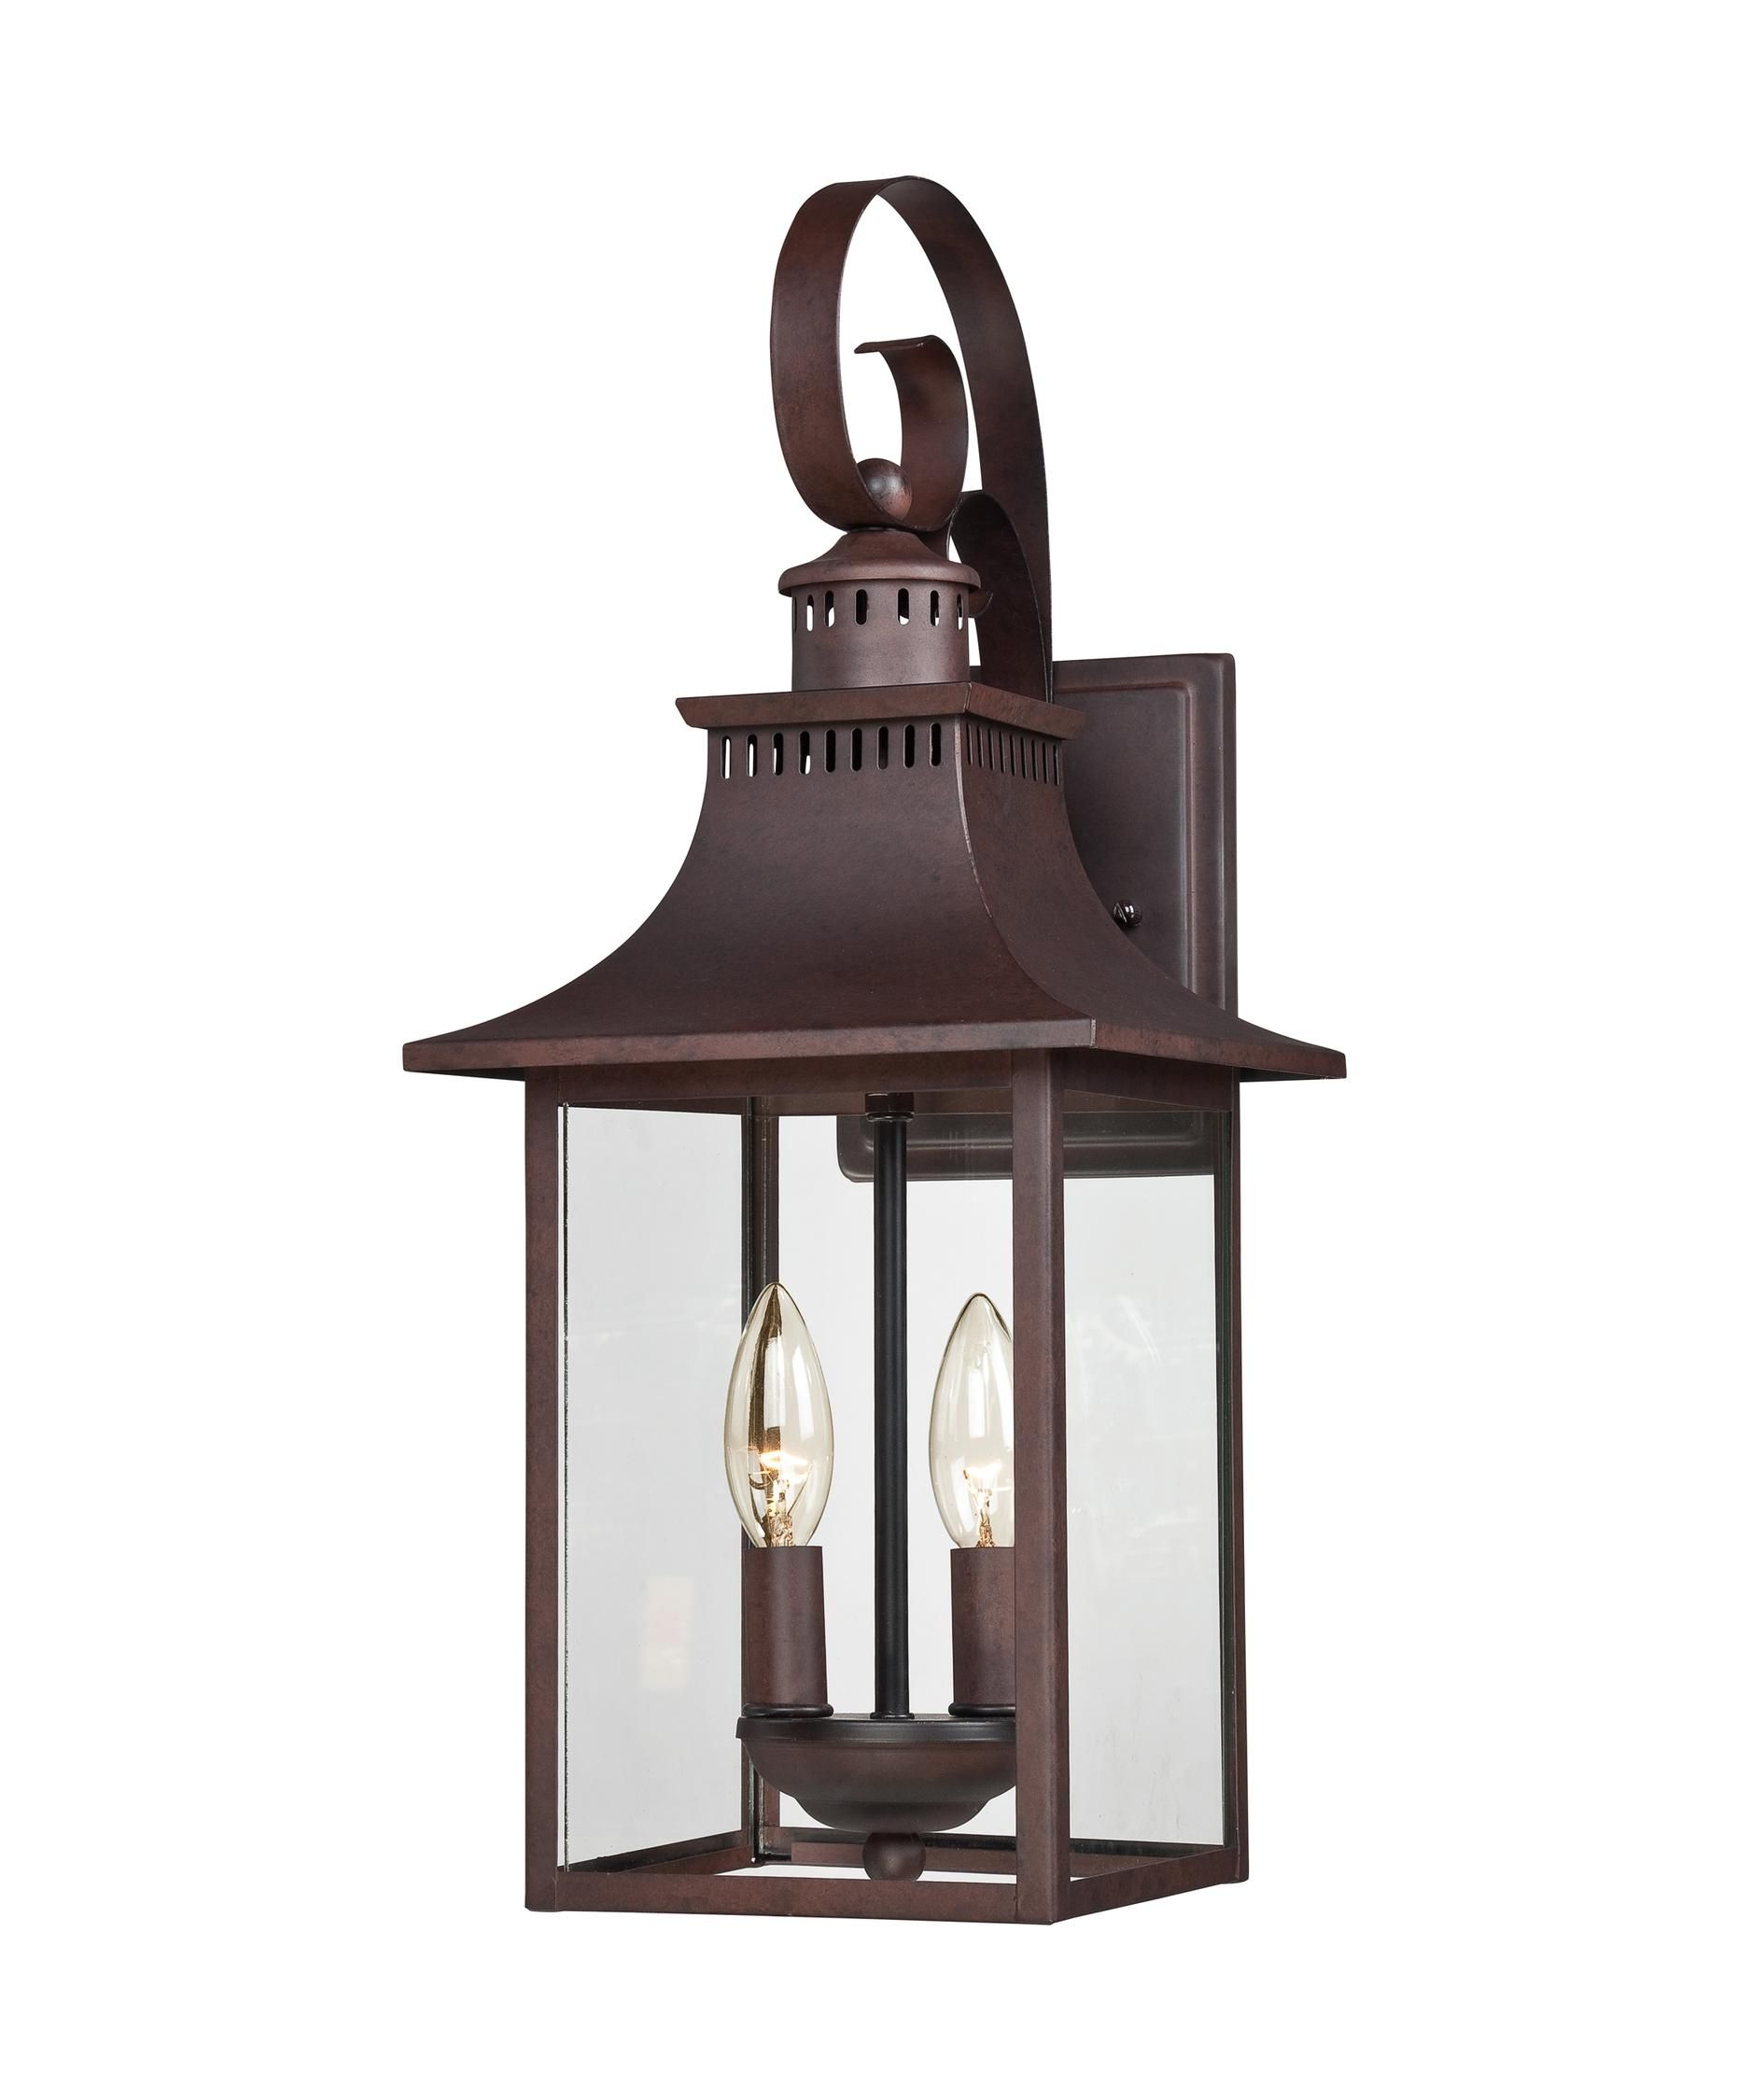 Quoizel Ccr8408 Chancellor 8 Inch Wide 2 Light Outdoor Wall Light Pertaining To Quoizel Outdoor Wall Lighting (View 3 of 15)